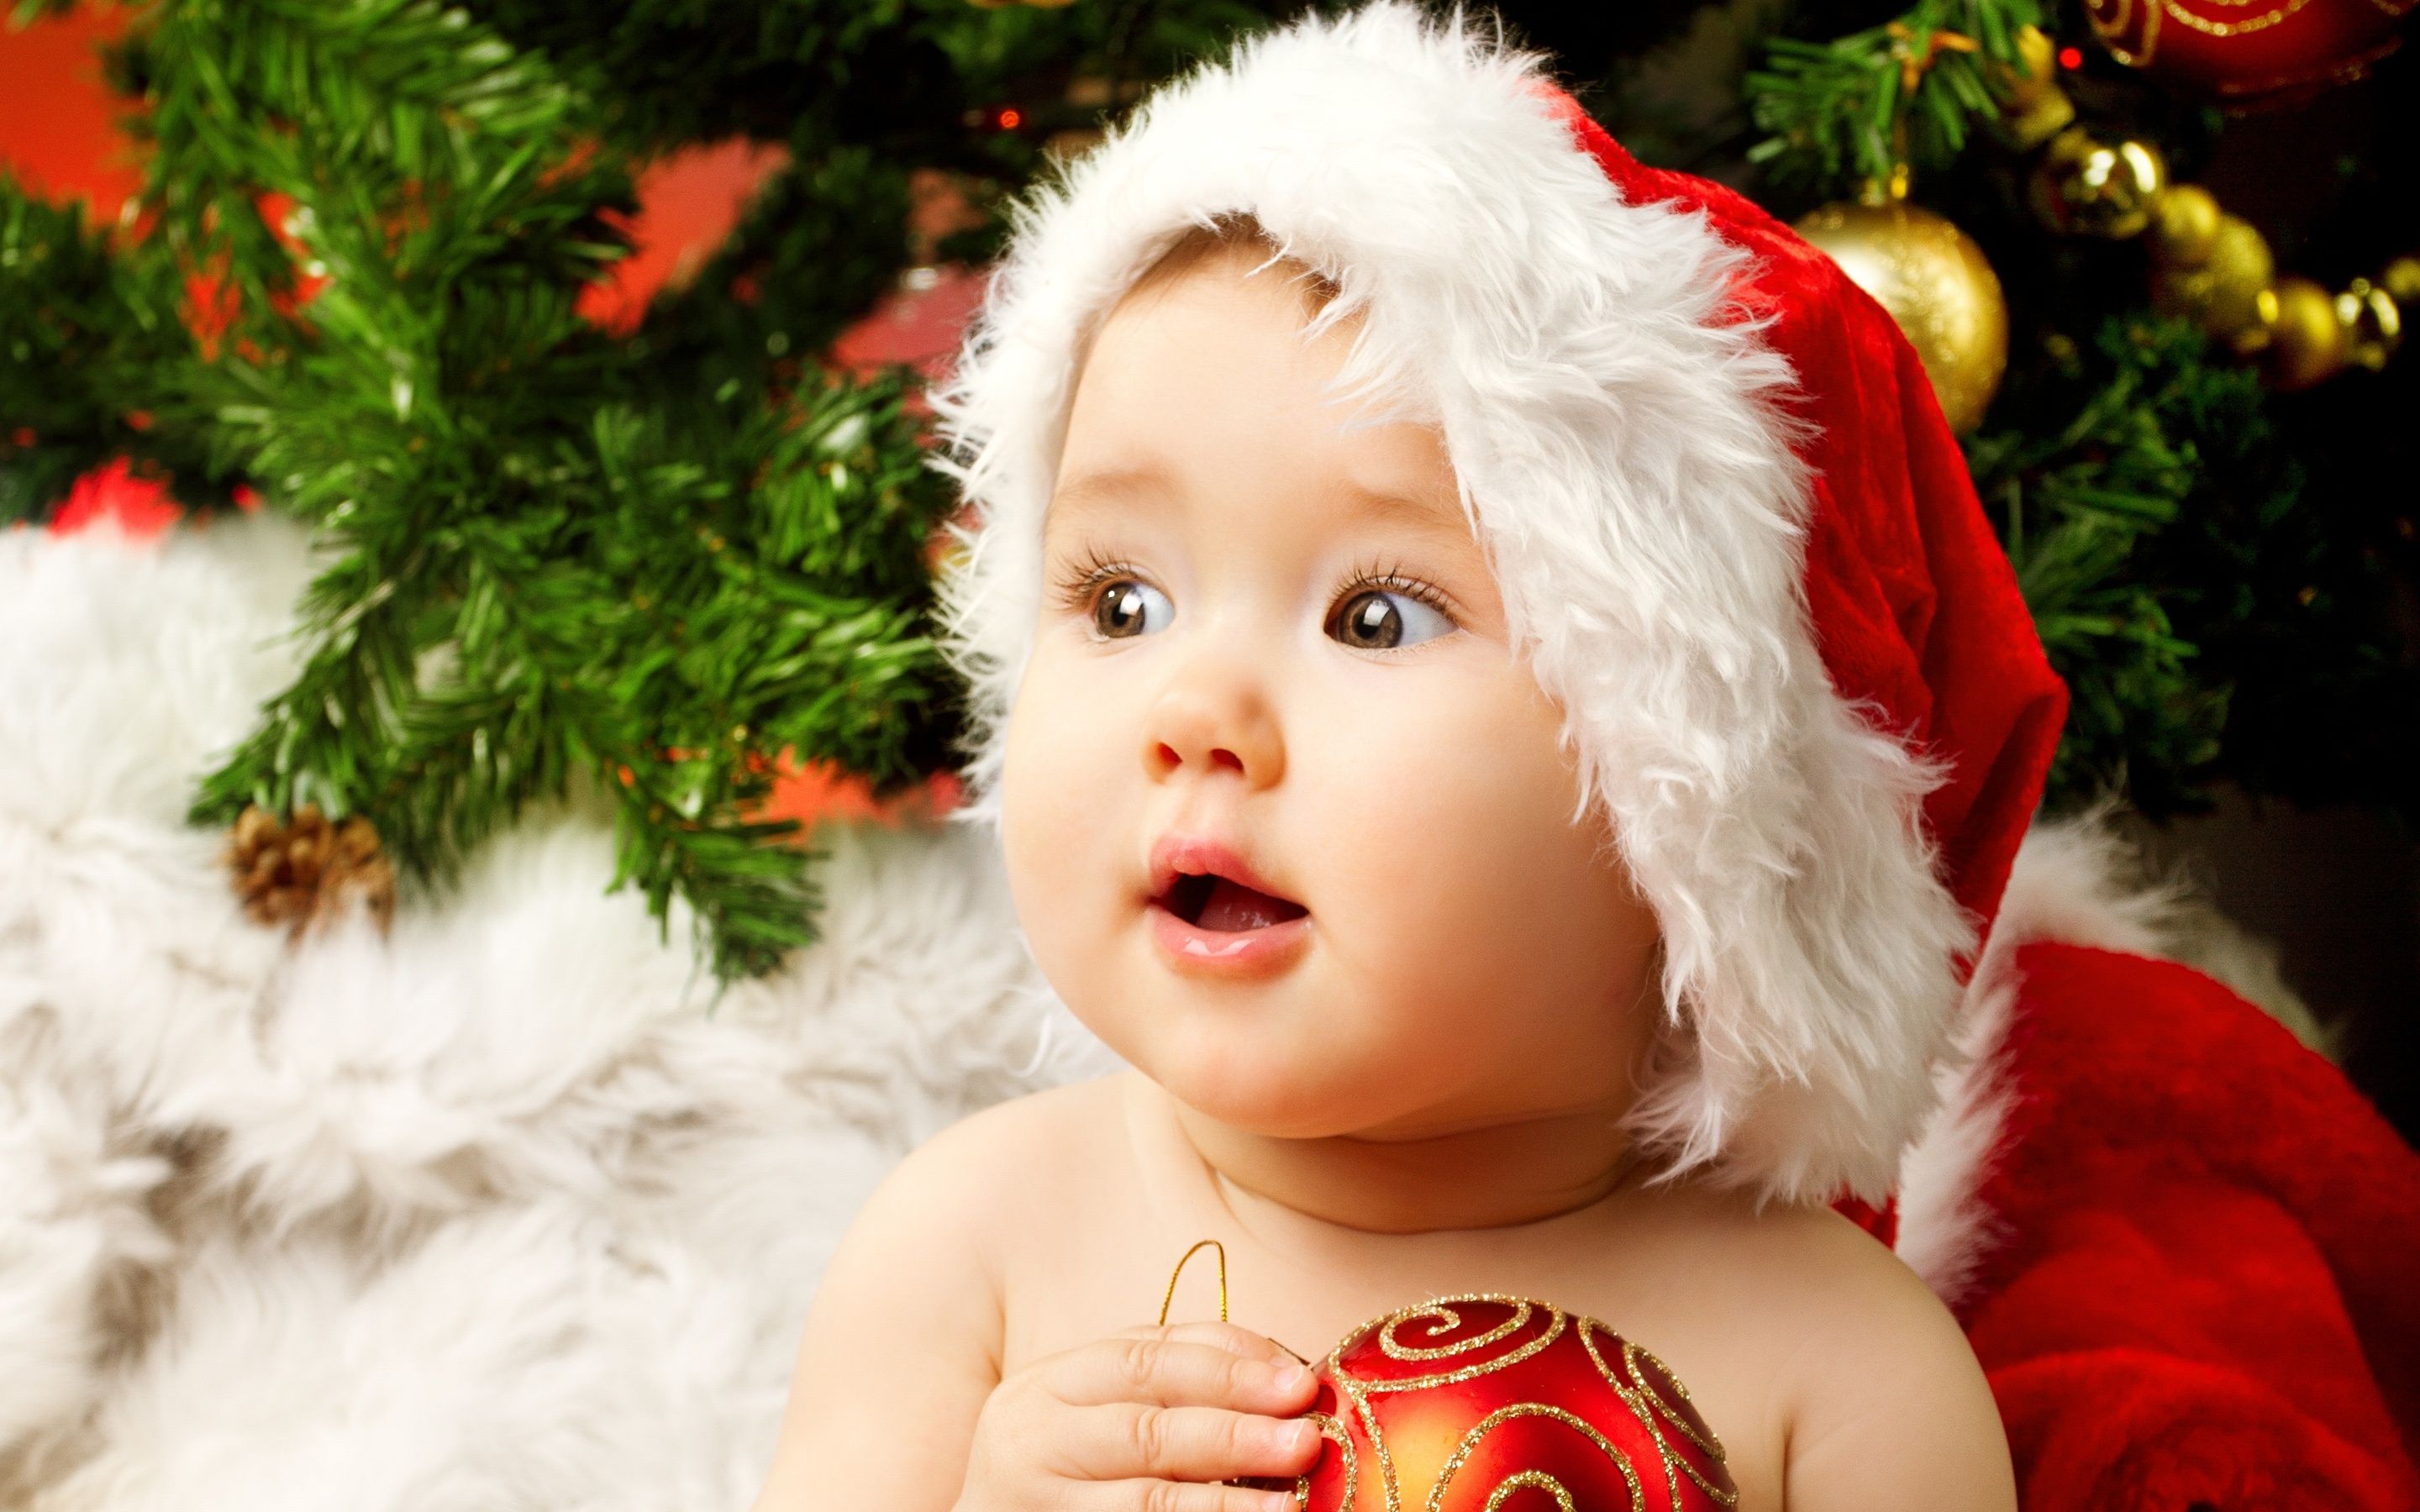 Cute Baby Wallpapers | Cute Babies Pictures | Cute Baby Girl ...